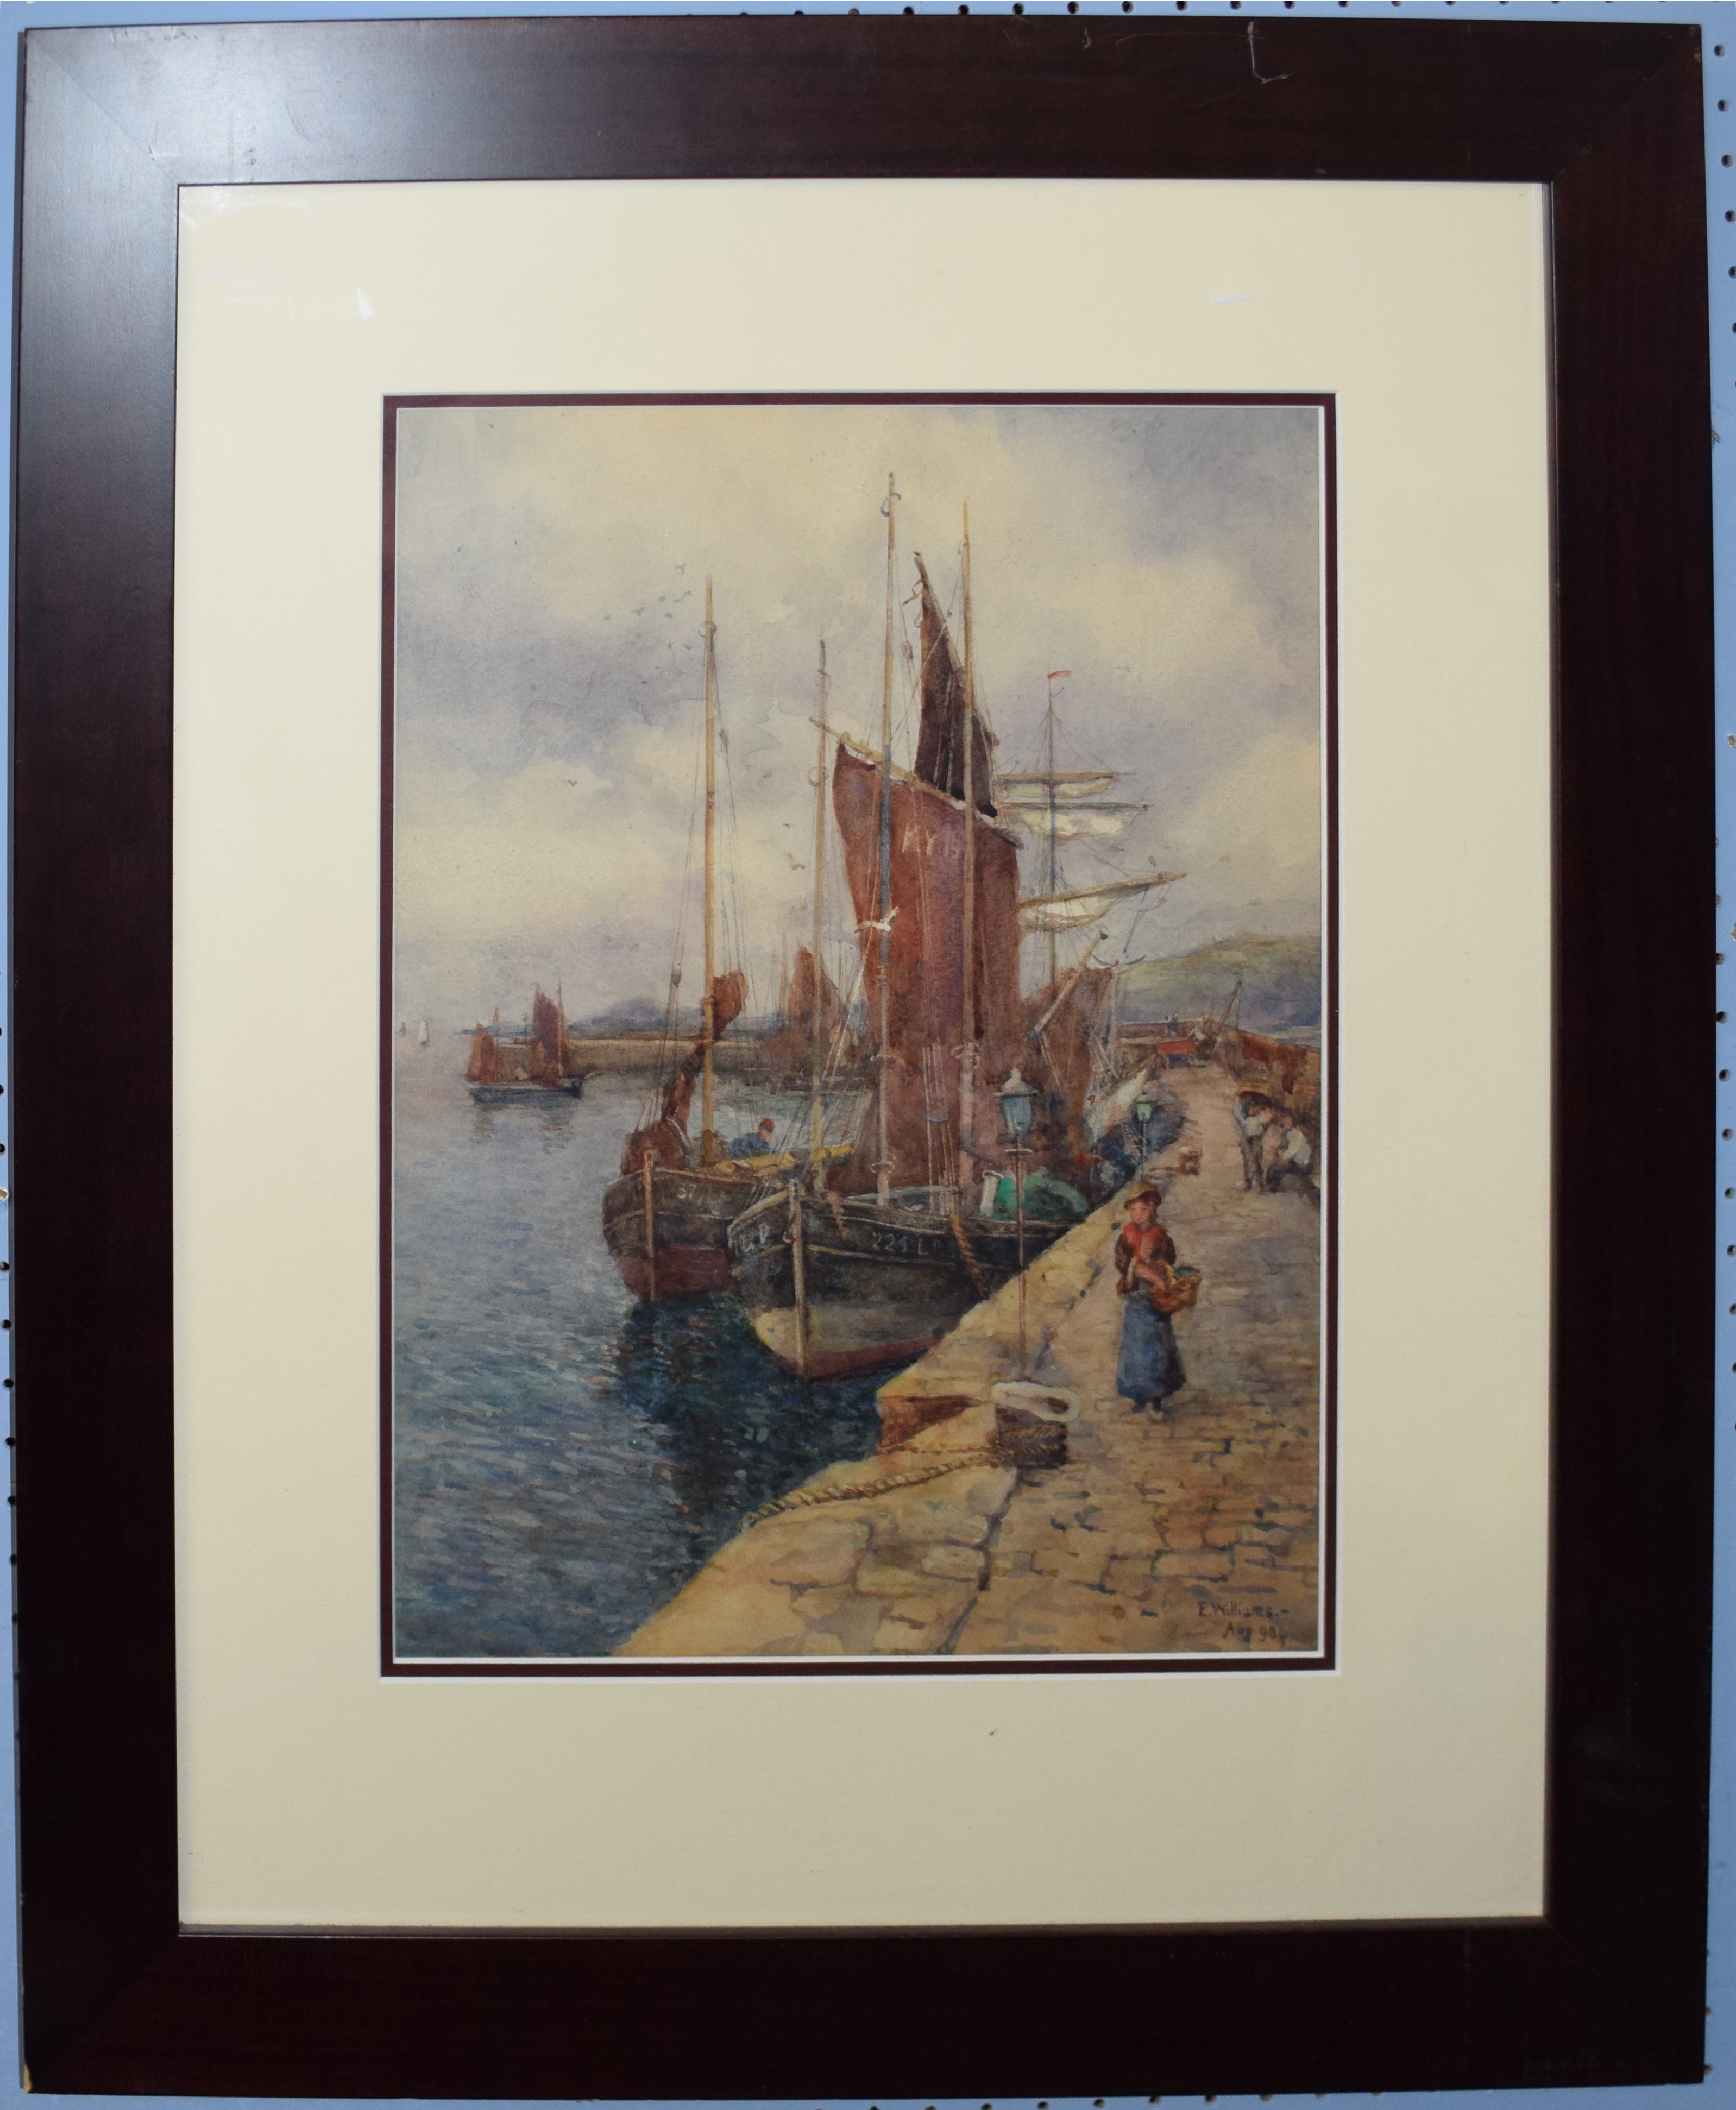 E Williams, Harbour scene with figures, watercolour, signed and dated Aug 98 lower right, 39 x 30cm